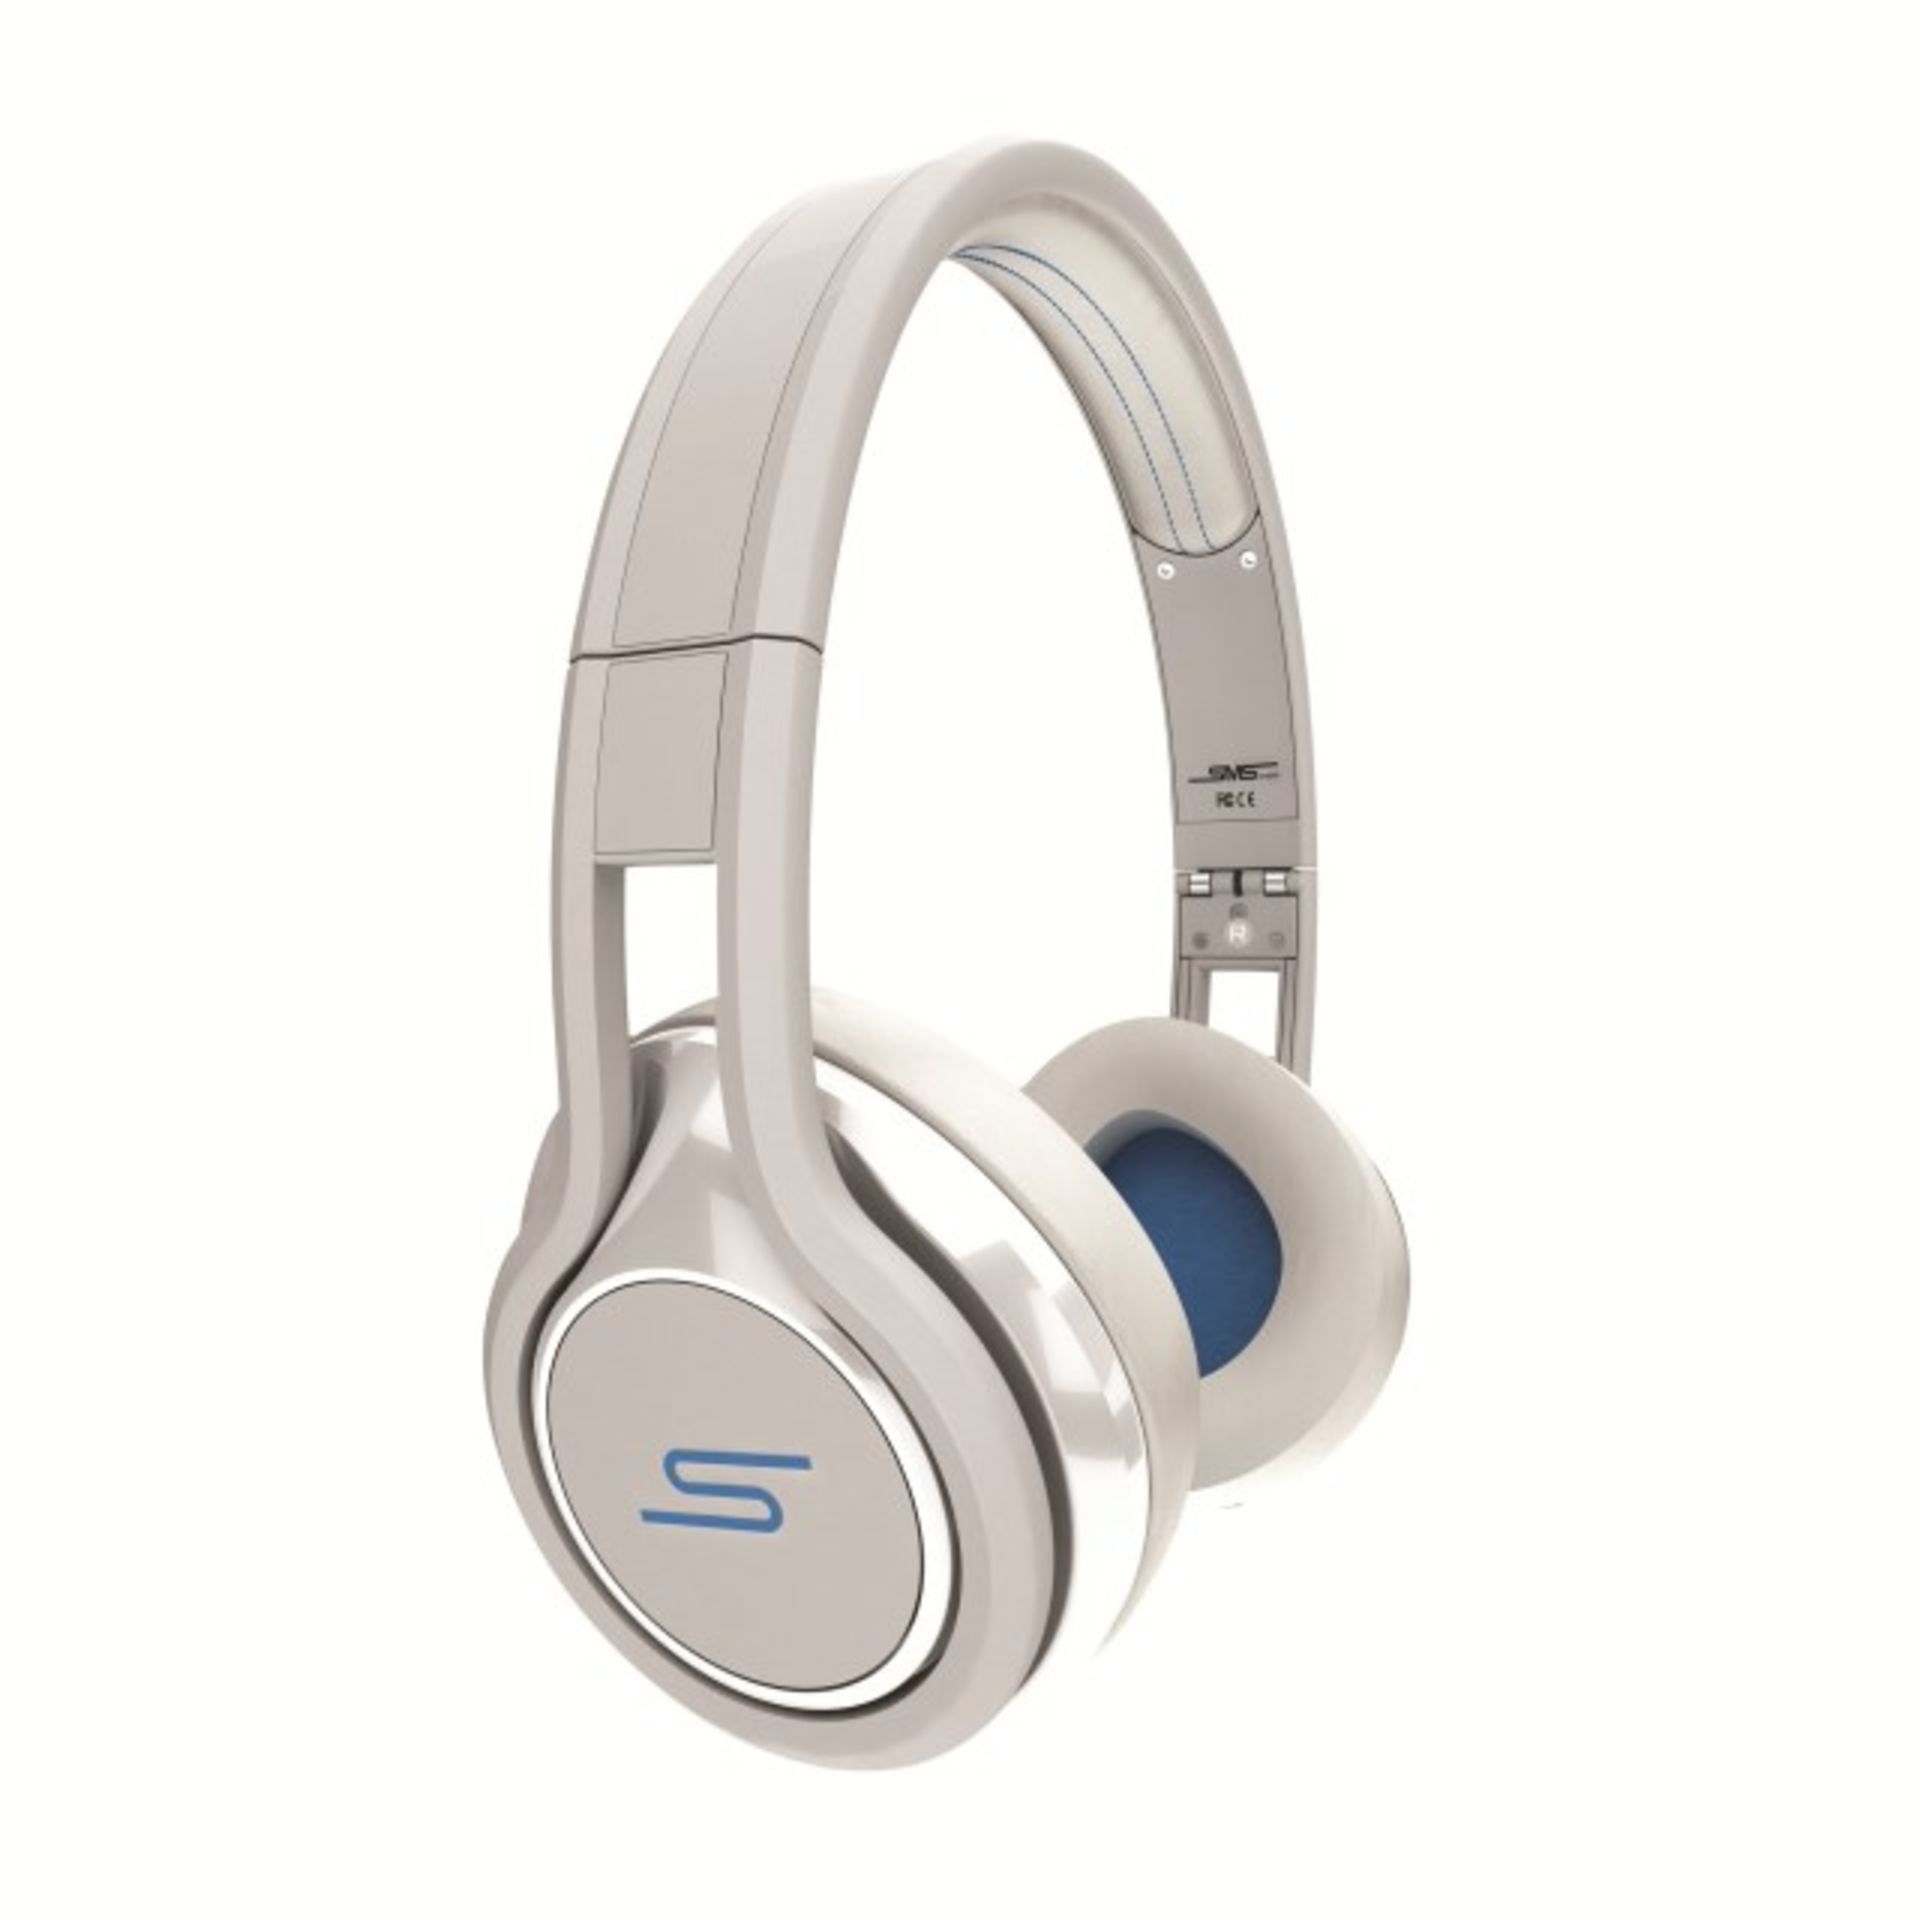 V Brand New SMS Audio Street By 50 Cent On-Ear Headphones With Mic - White *Item will be available